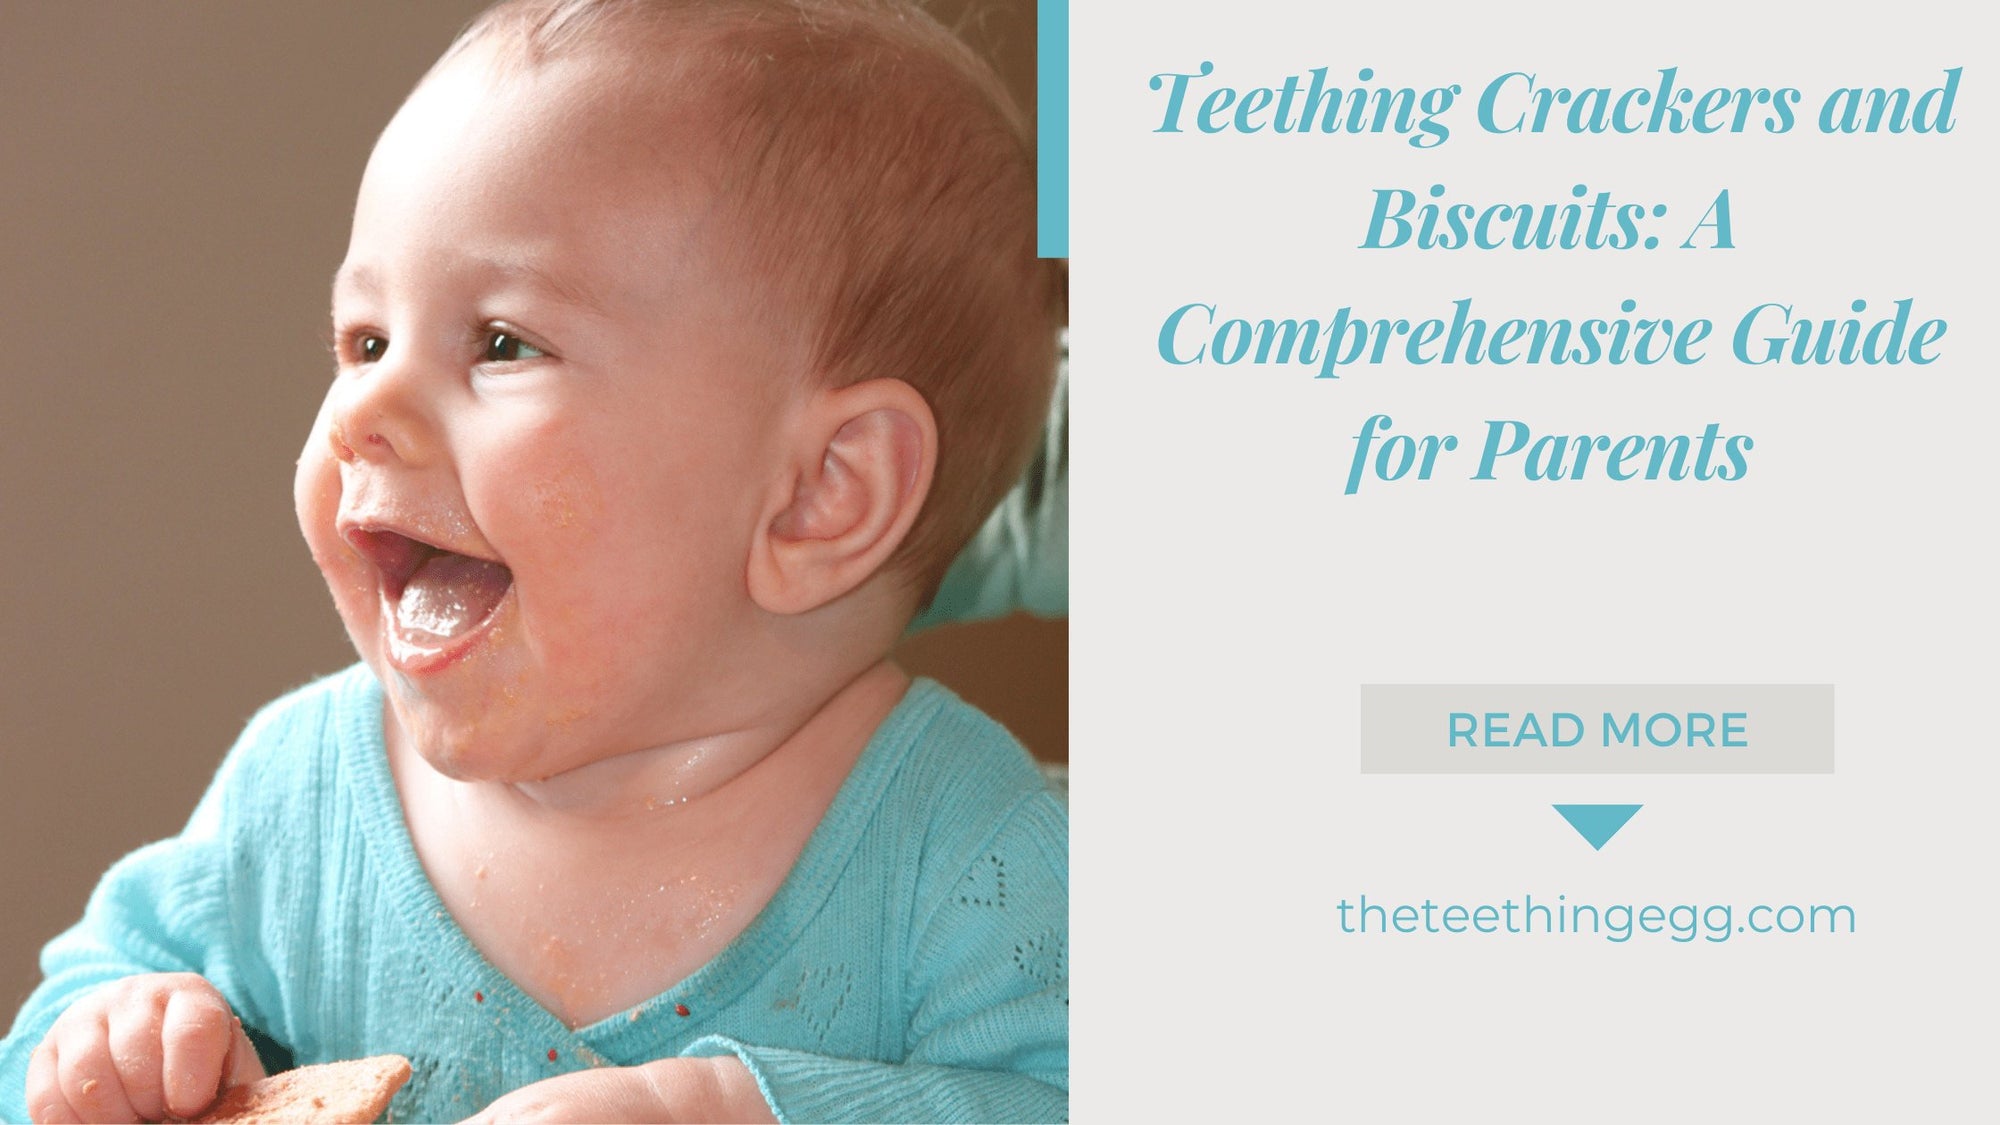 Teething Crackers and Biscuits: A Comprehensive Guide for Parents